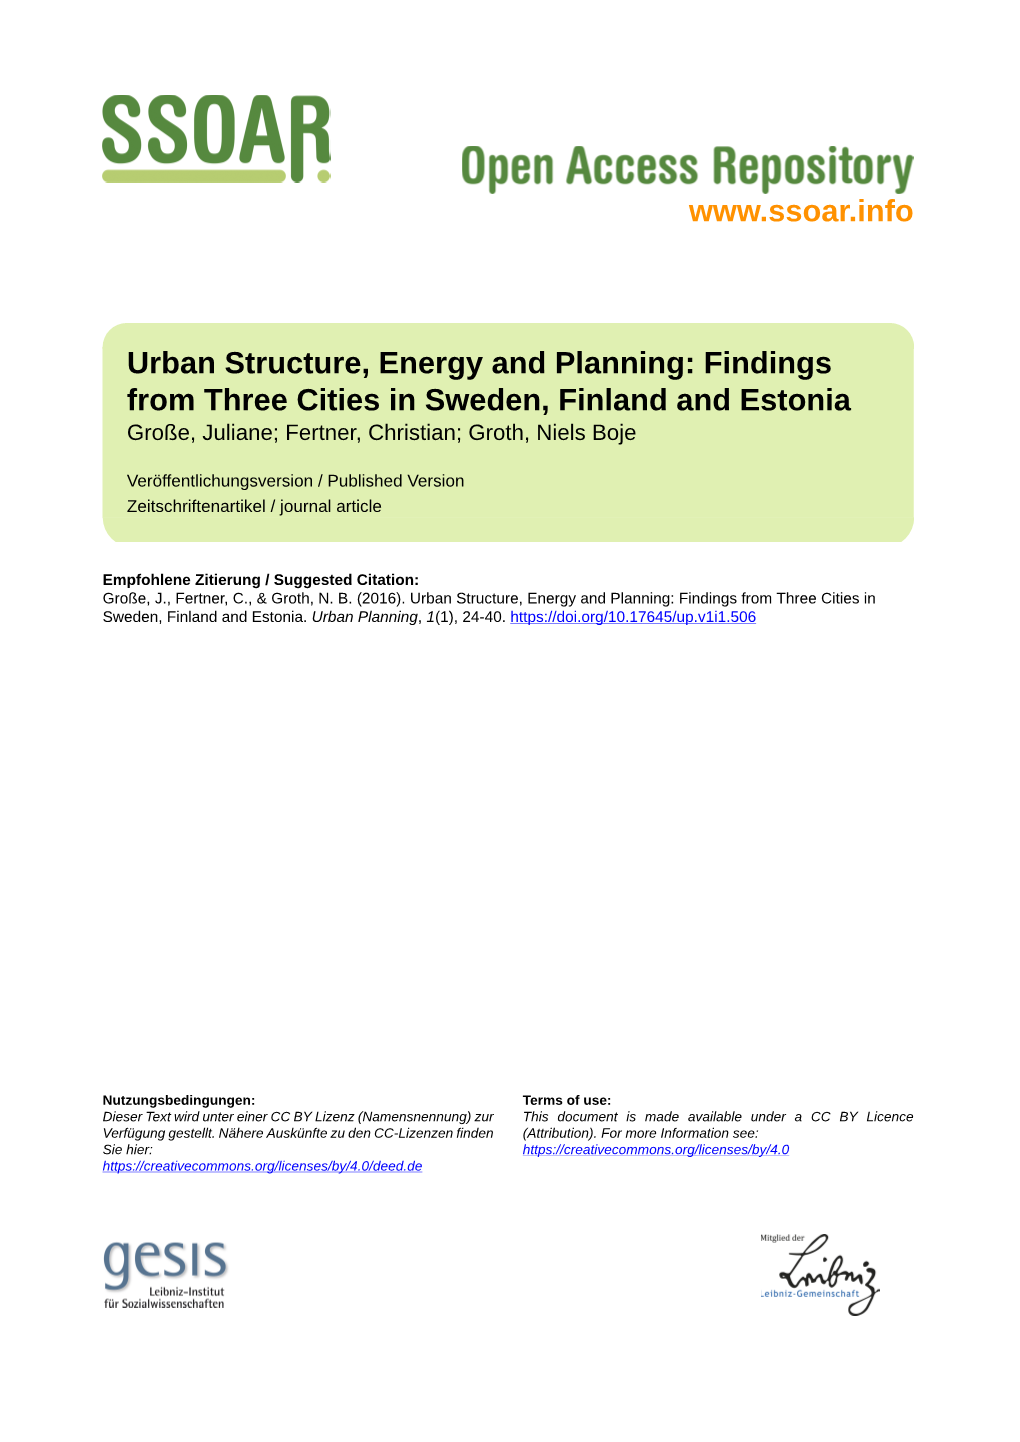 Urban Structure, Energy and Planning: Findings from Three Cities in Sweden, Finland and Estonia Große, Juliane; Fertner, Christian; Groth, Niels Boje